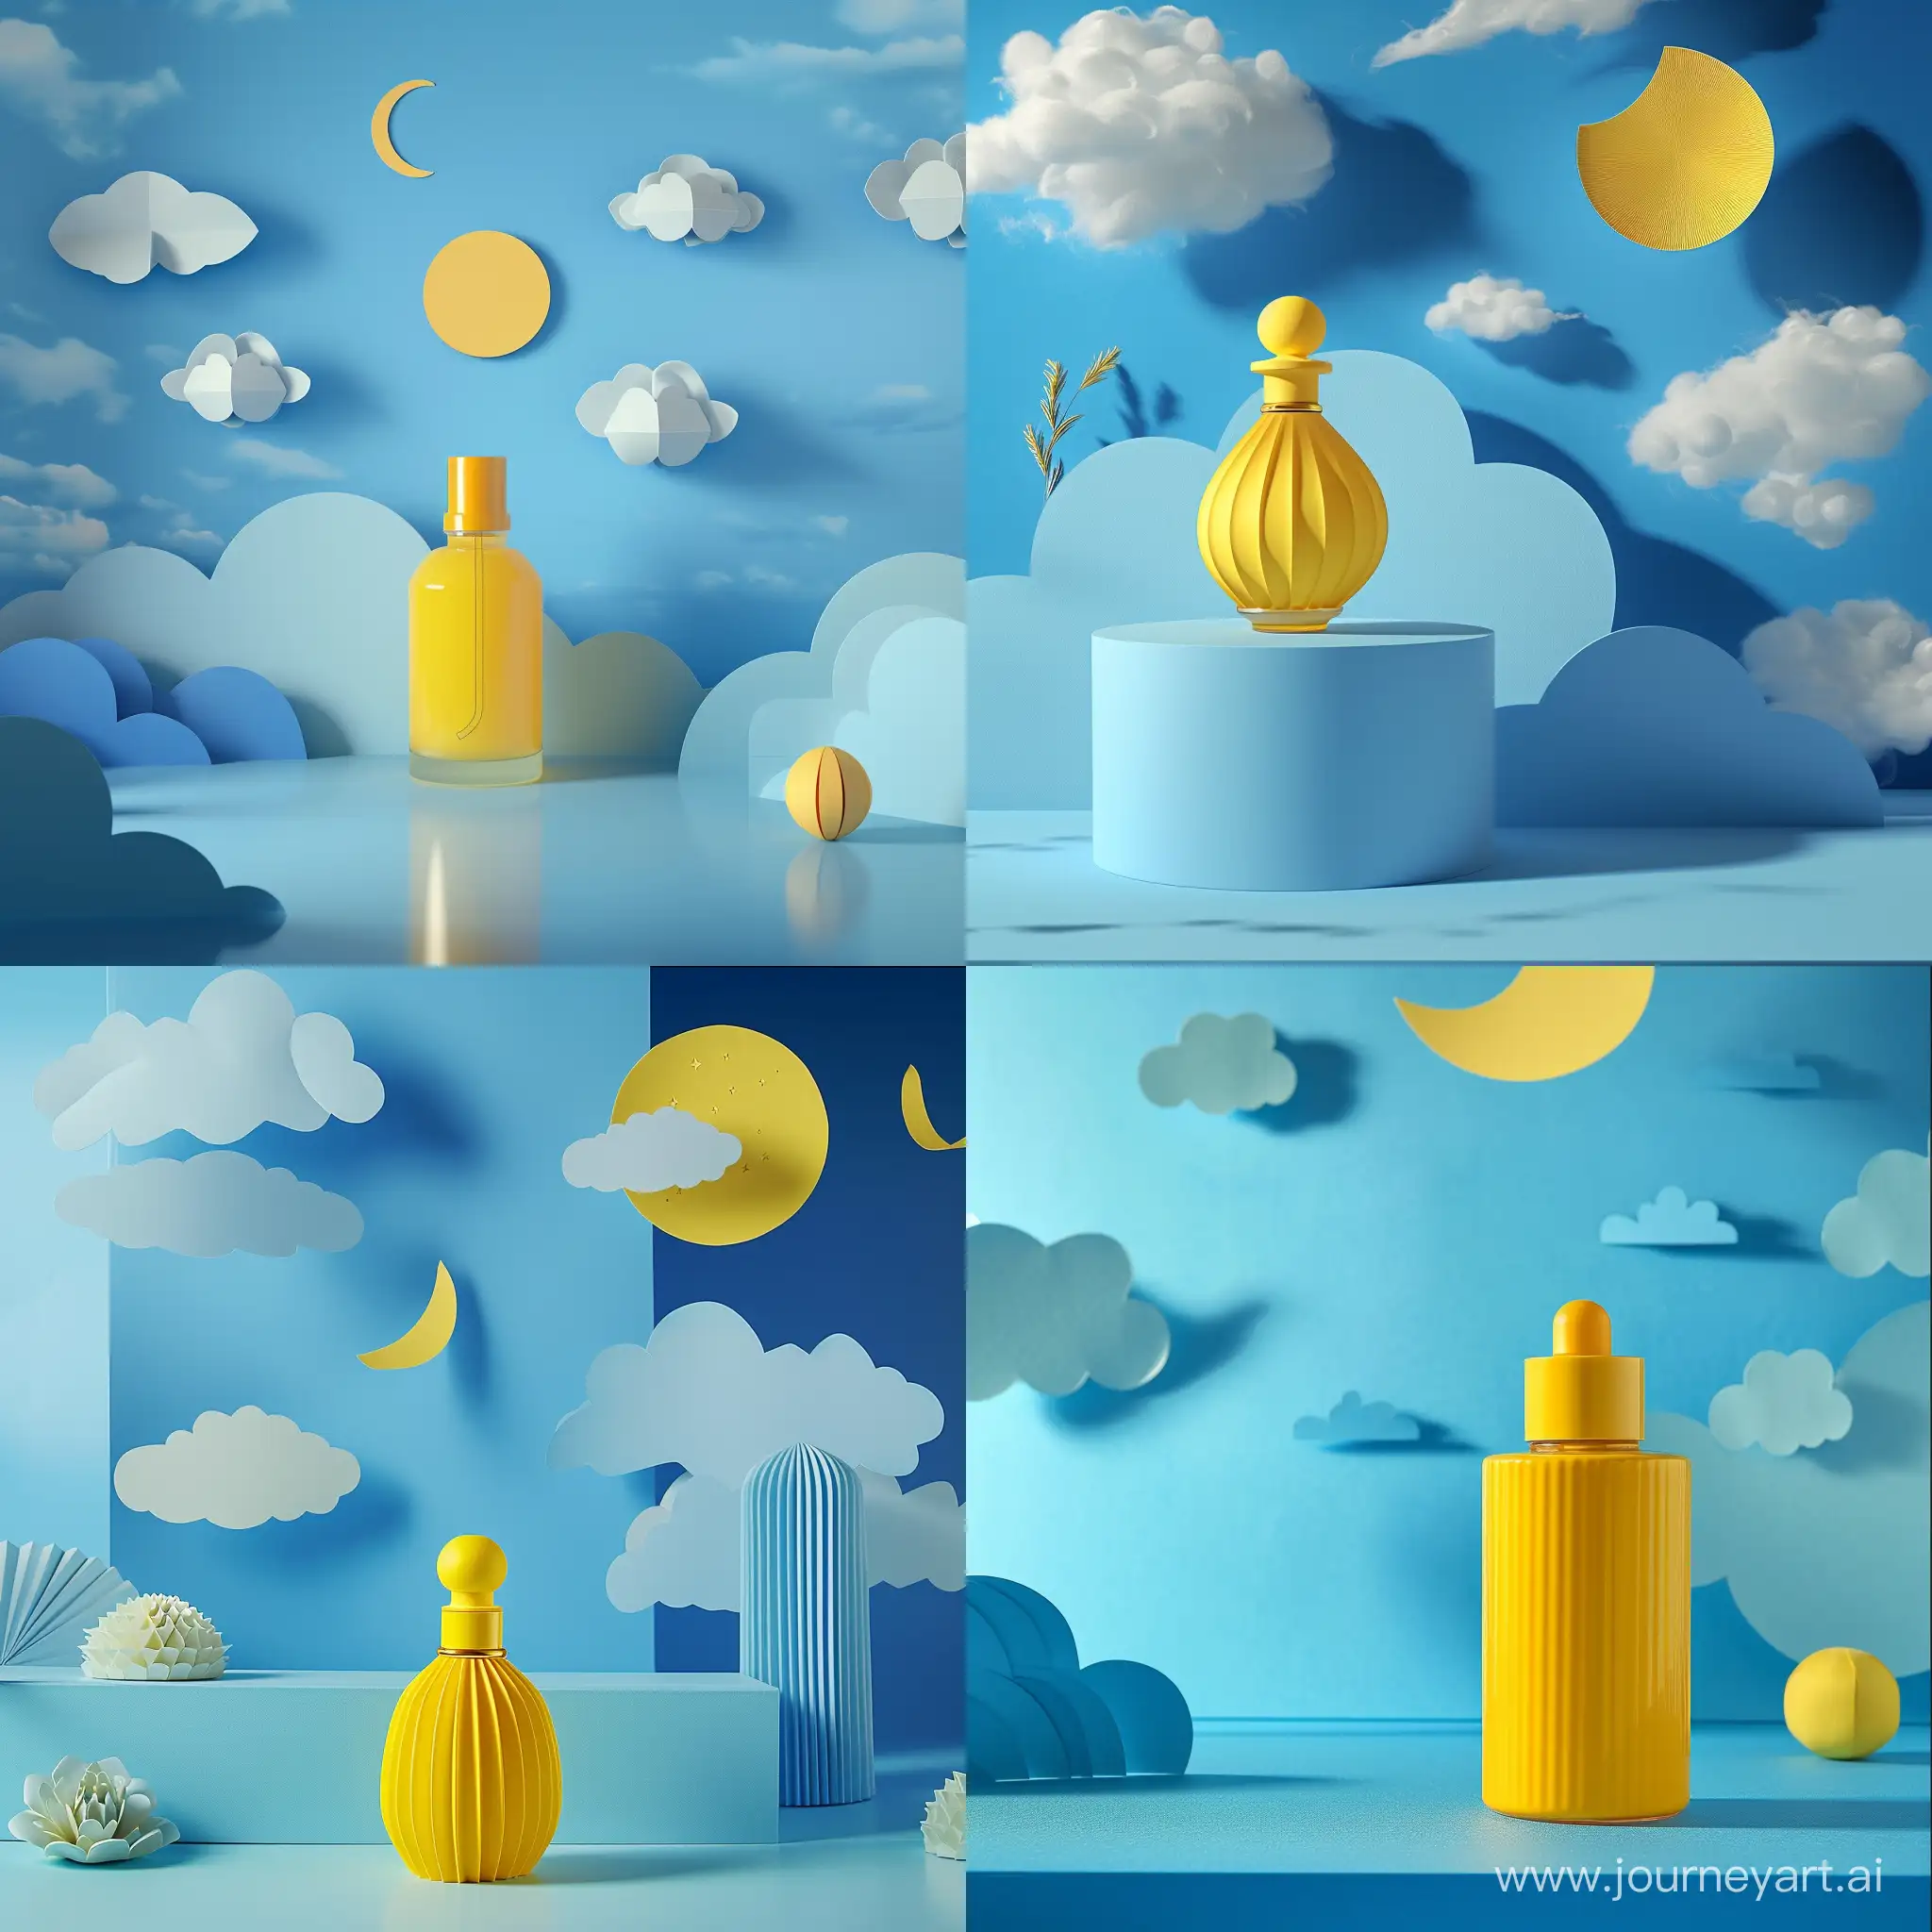 A yellow perfume bottle standing on a blue surface, in front of a blue paper art background with paper clouds, paper moon